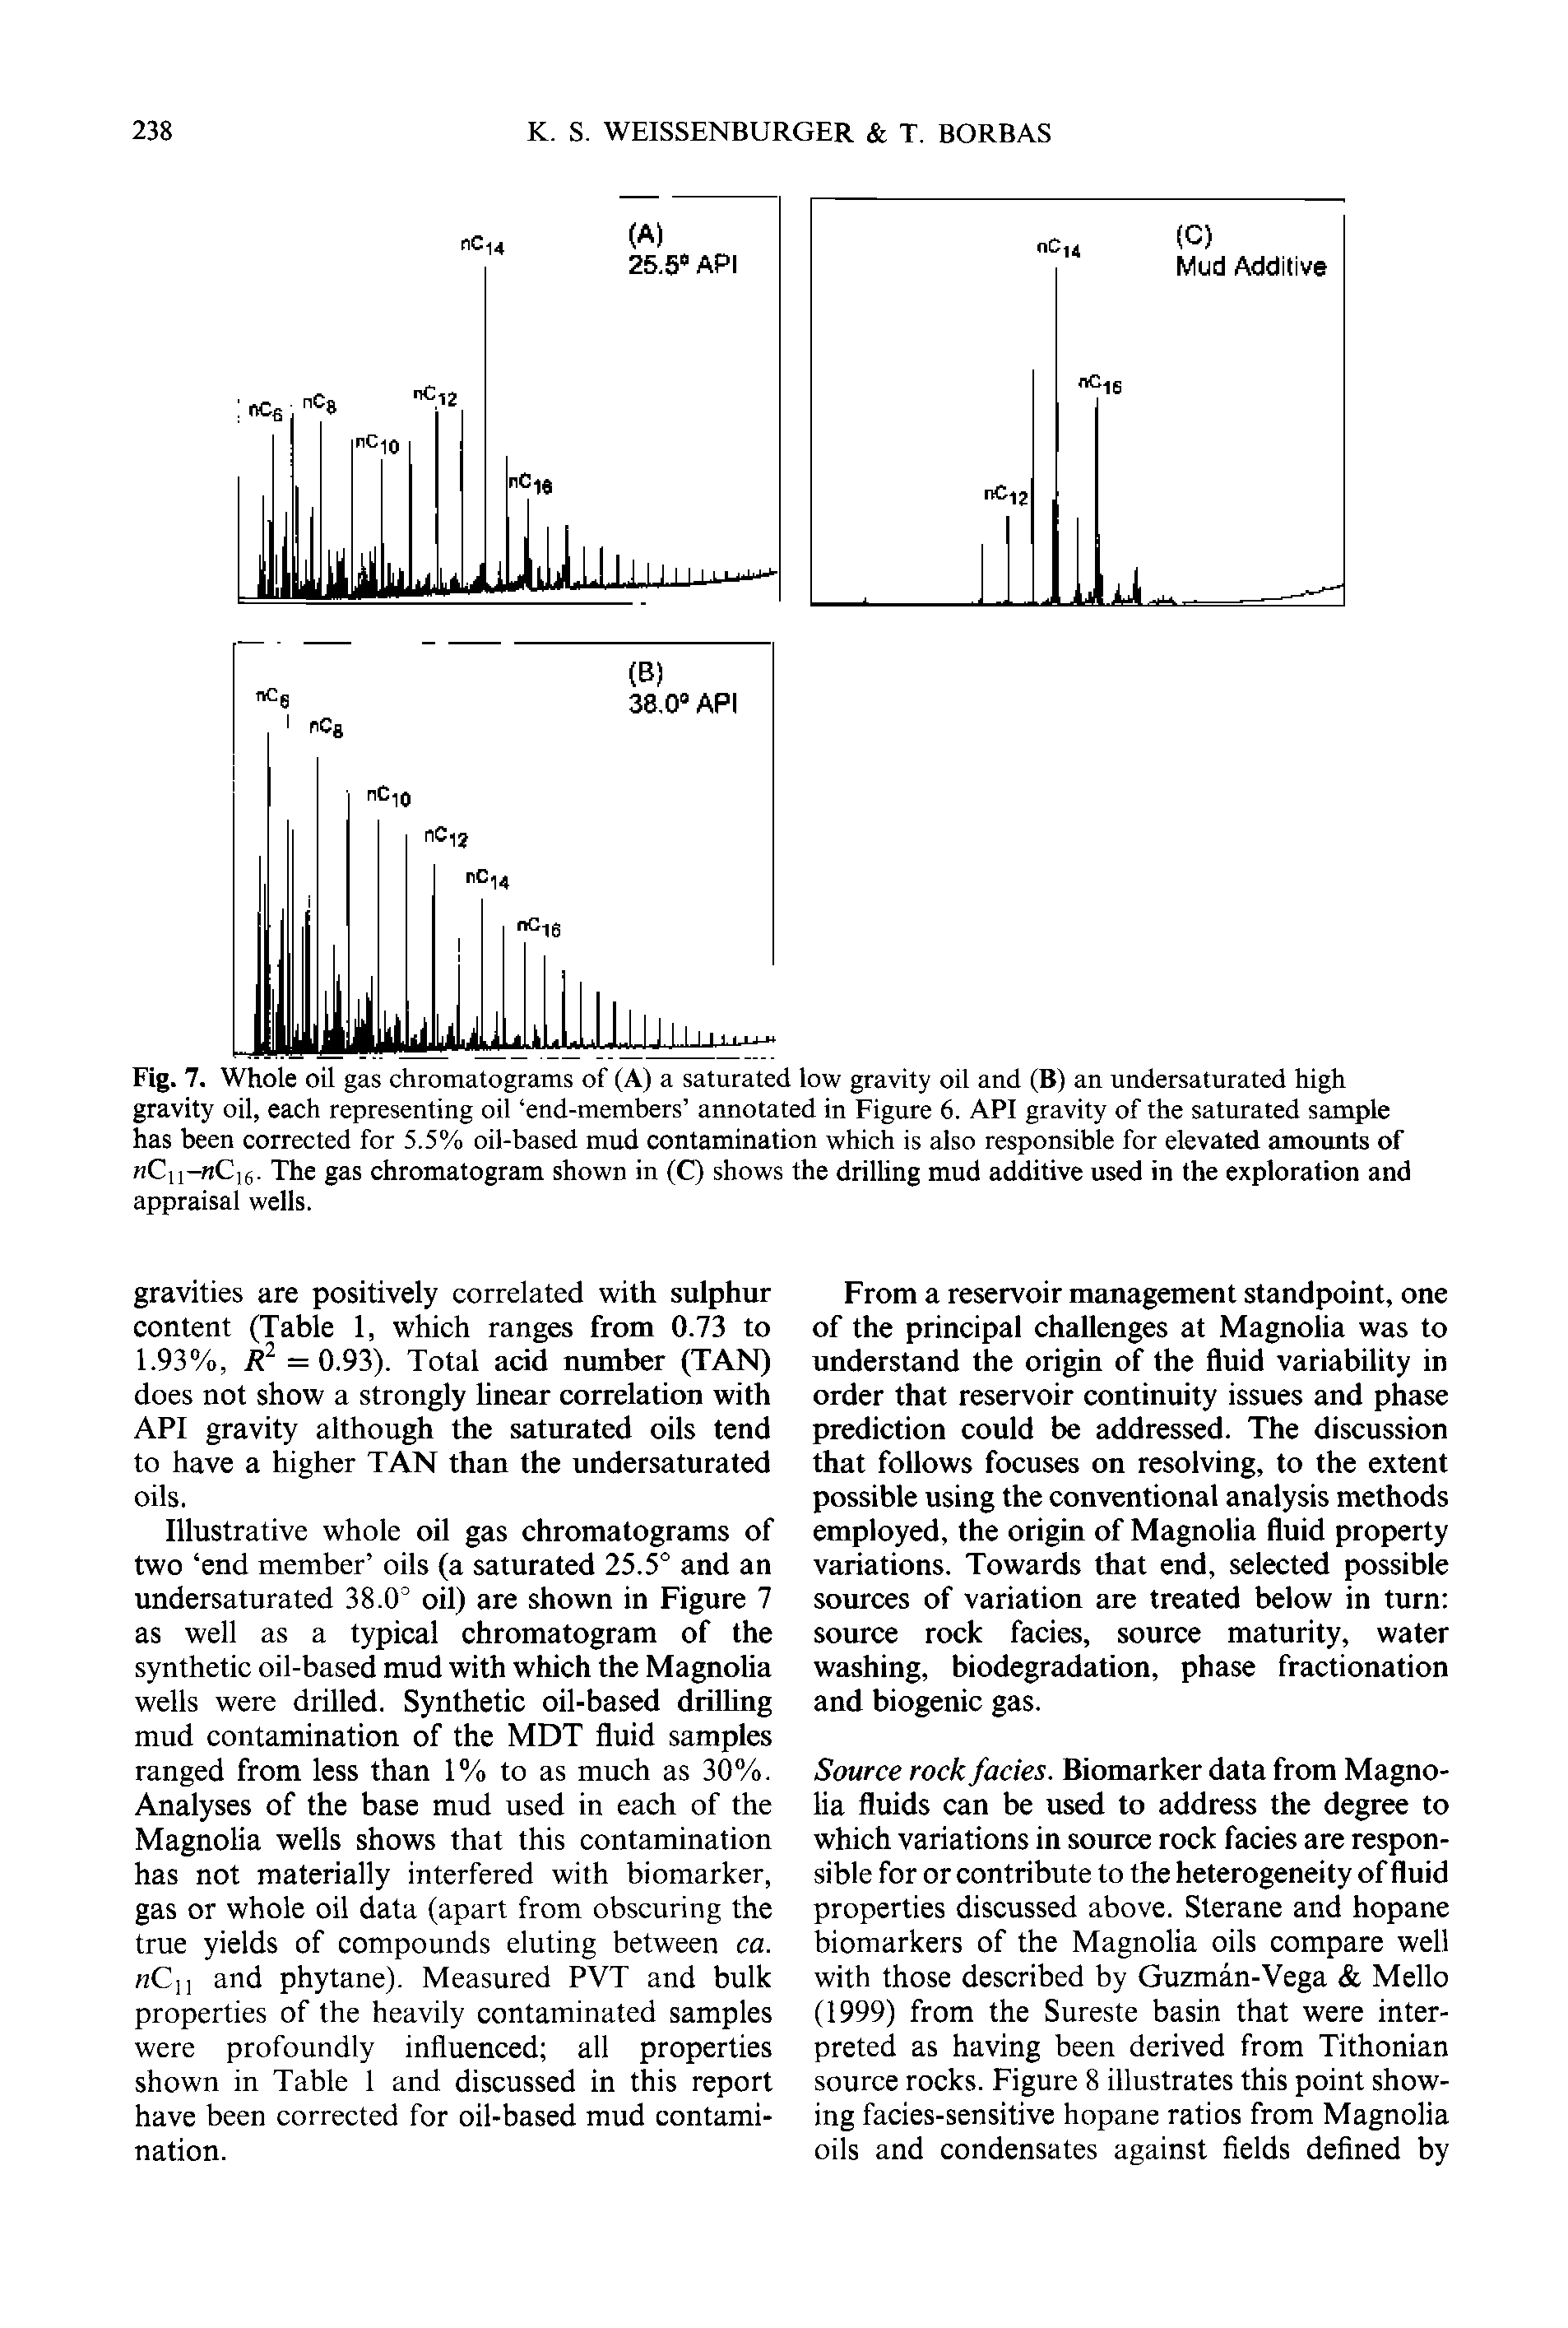 Fig. 7. Whole oil gas chromatograms of (A) a saturated low gravity oil and (B) an undersaturated high gravity oil, each representing oil end-members annotated in Figure 6. API gravity of the saturated sample has been corrected for 5.5% oil-based mud contamination which is also responsible for elevated amounts of nCii- C,g. The gas chromatogram shown in (C) shows the drilling mud additive used in the exploration and appraisal wells.